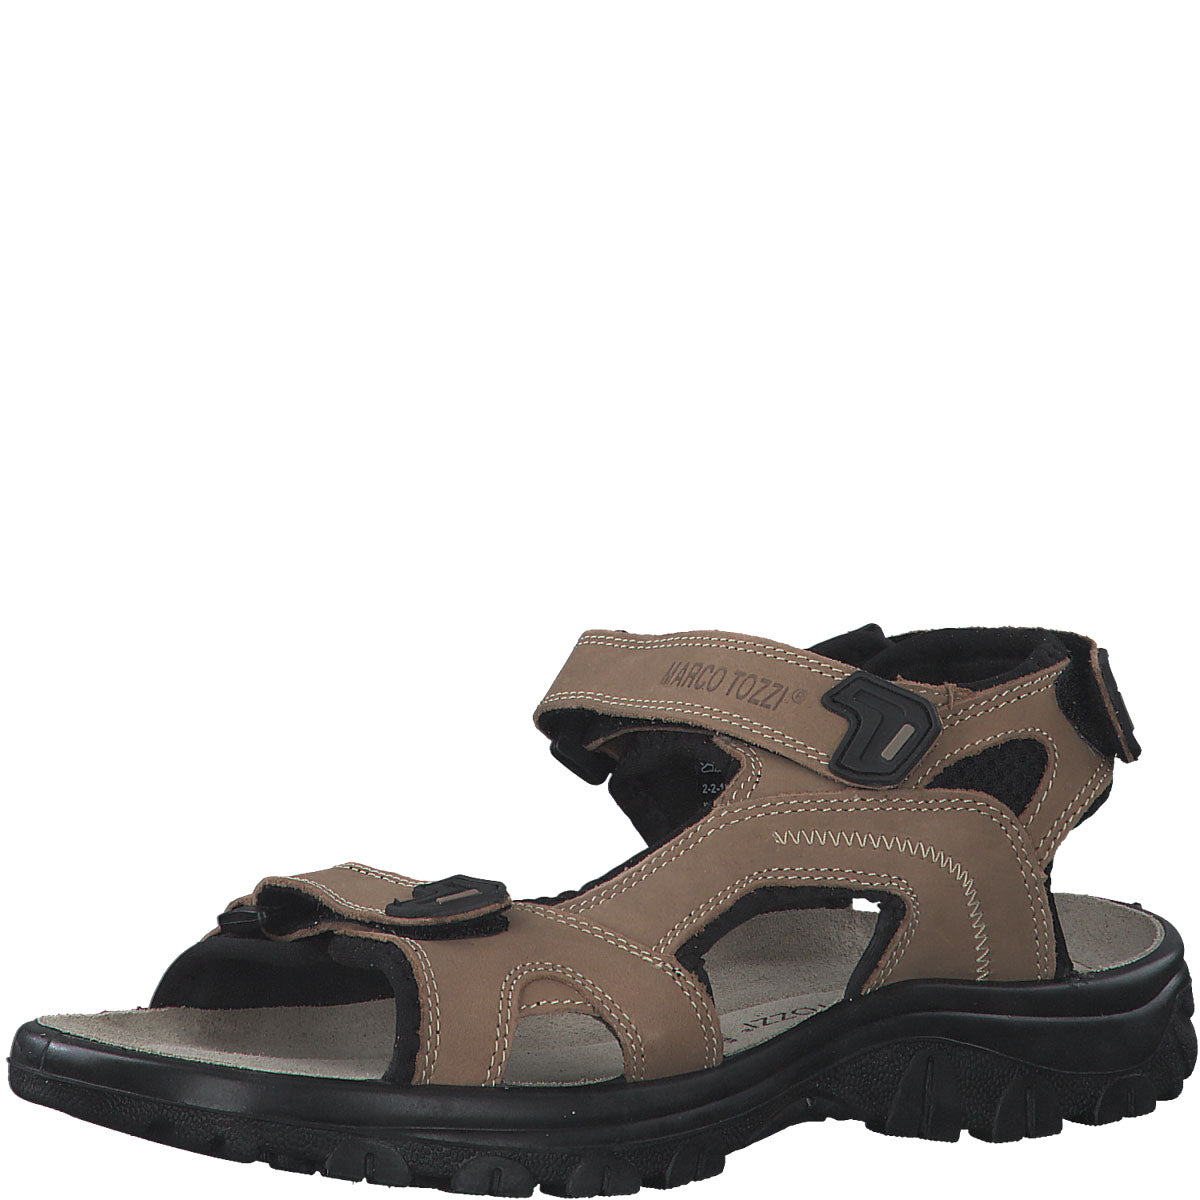 Classic Leather Men's Summer Sandals with Comfortable Footbed